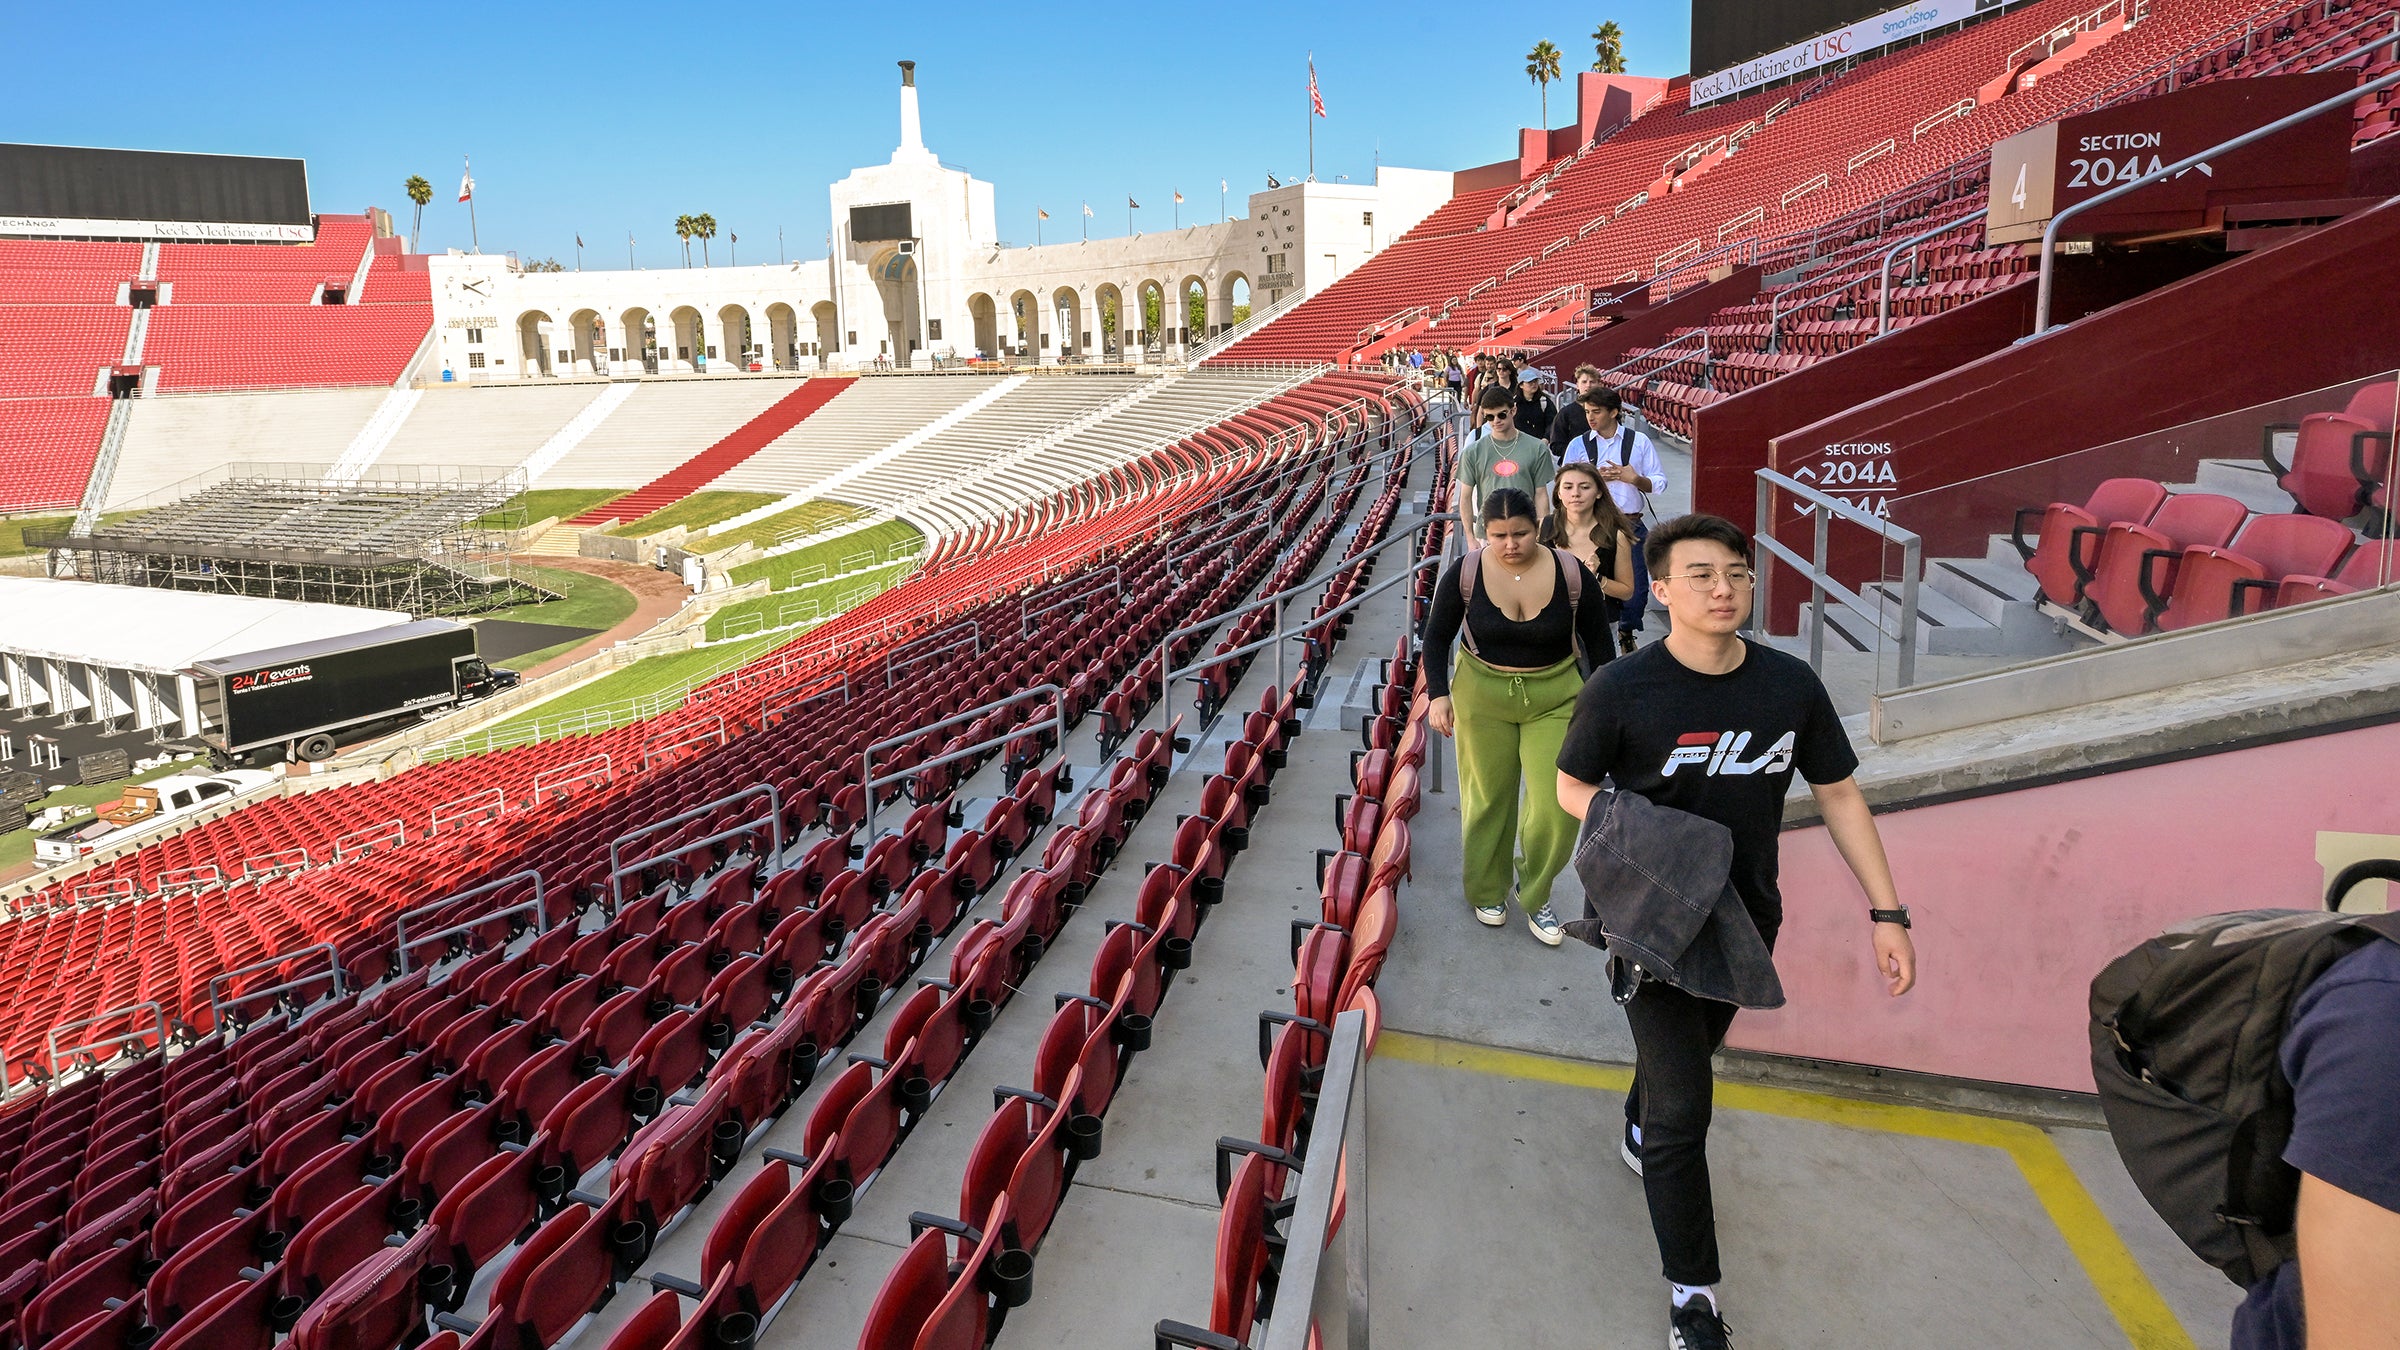 Classes in the Coliseum: Tour focuses on sustainability